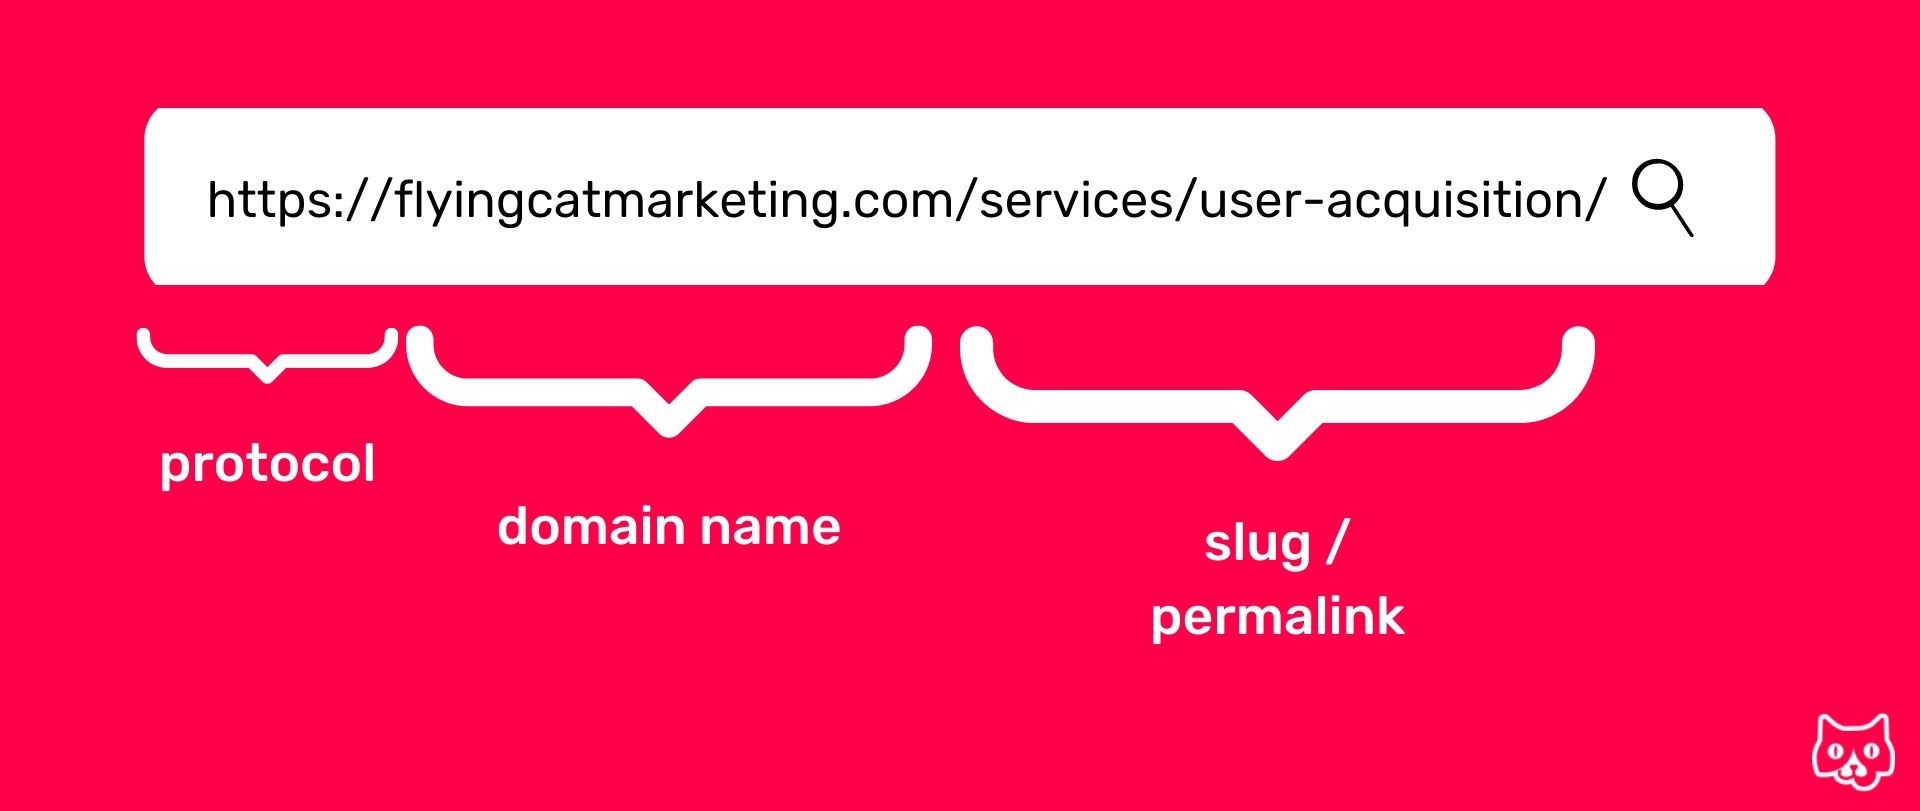 Graphic with the URL for the user acquisition with the protocol, domain name, and slug portions each labeled.